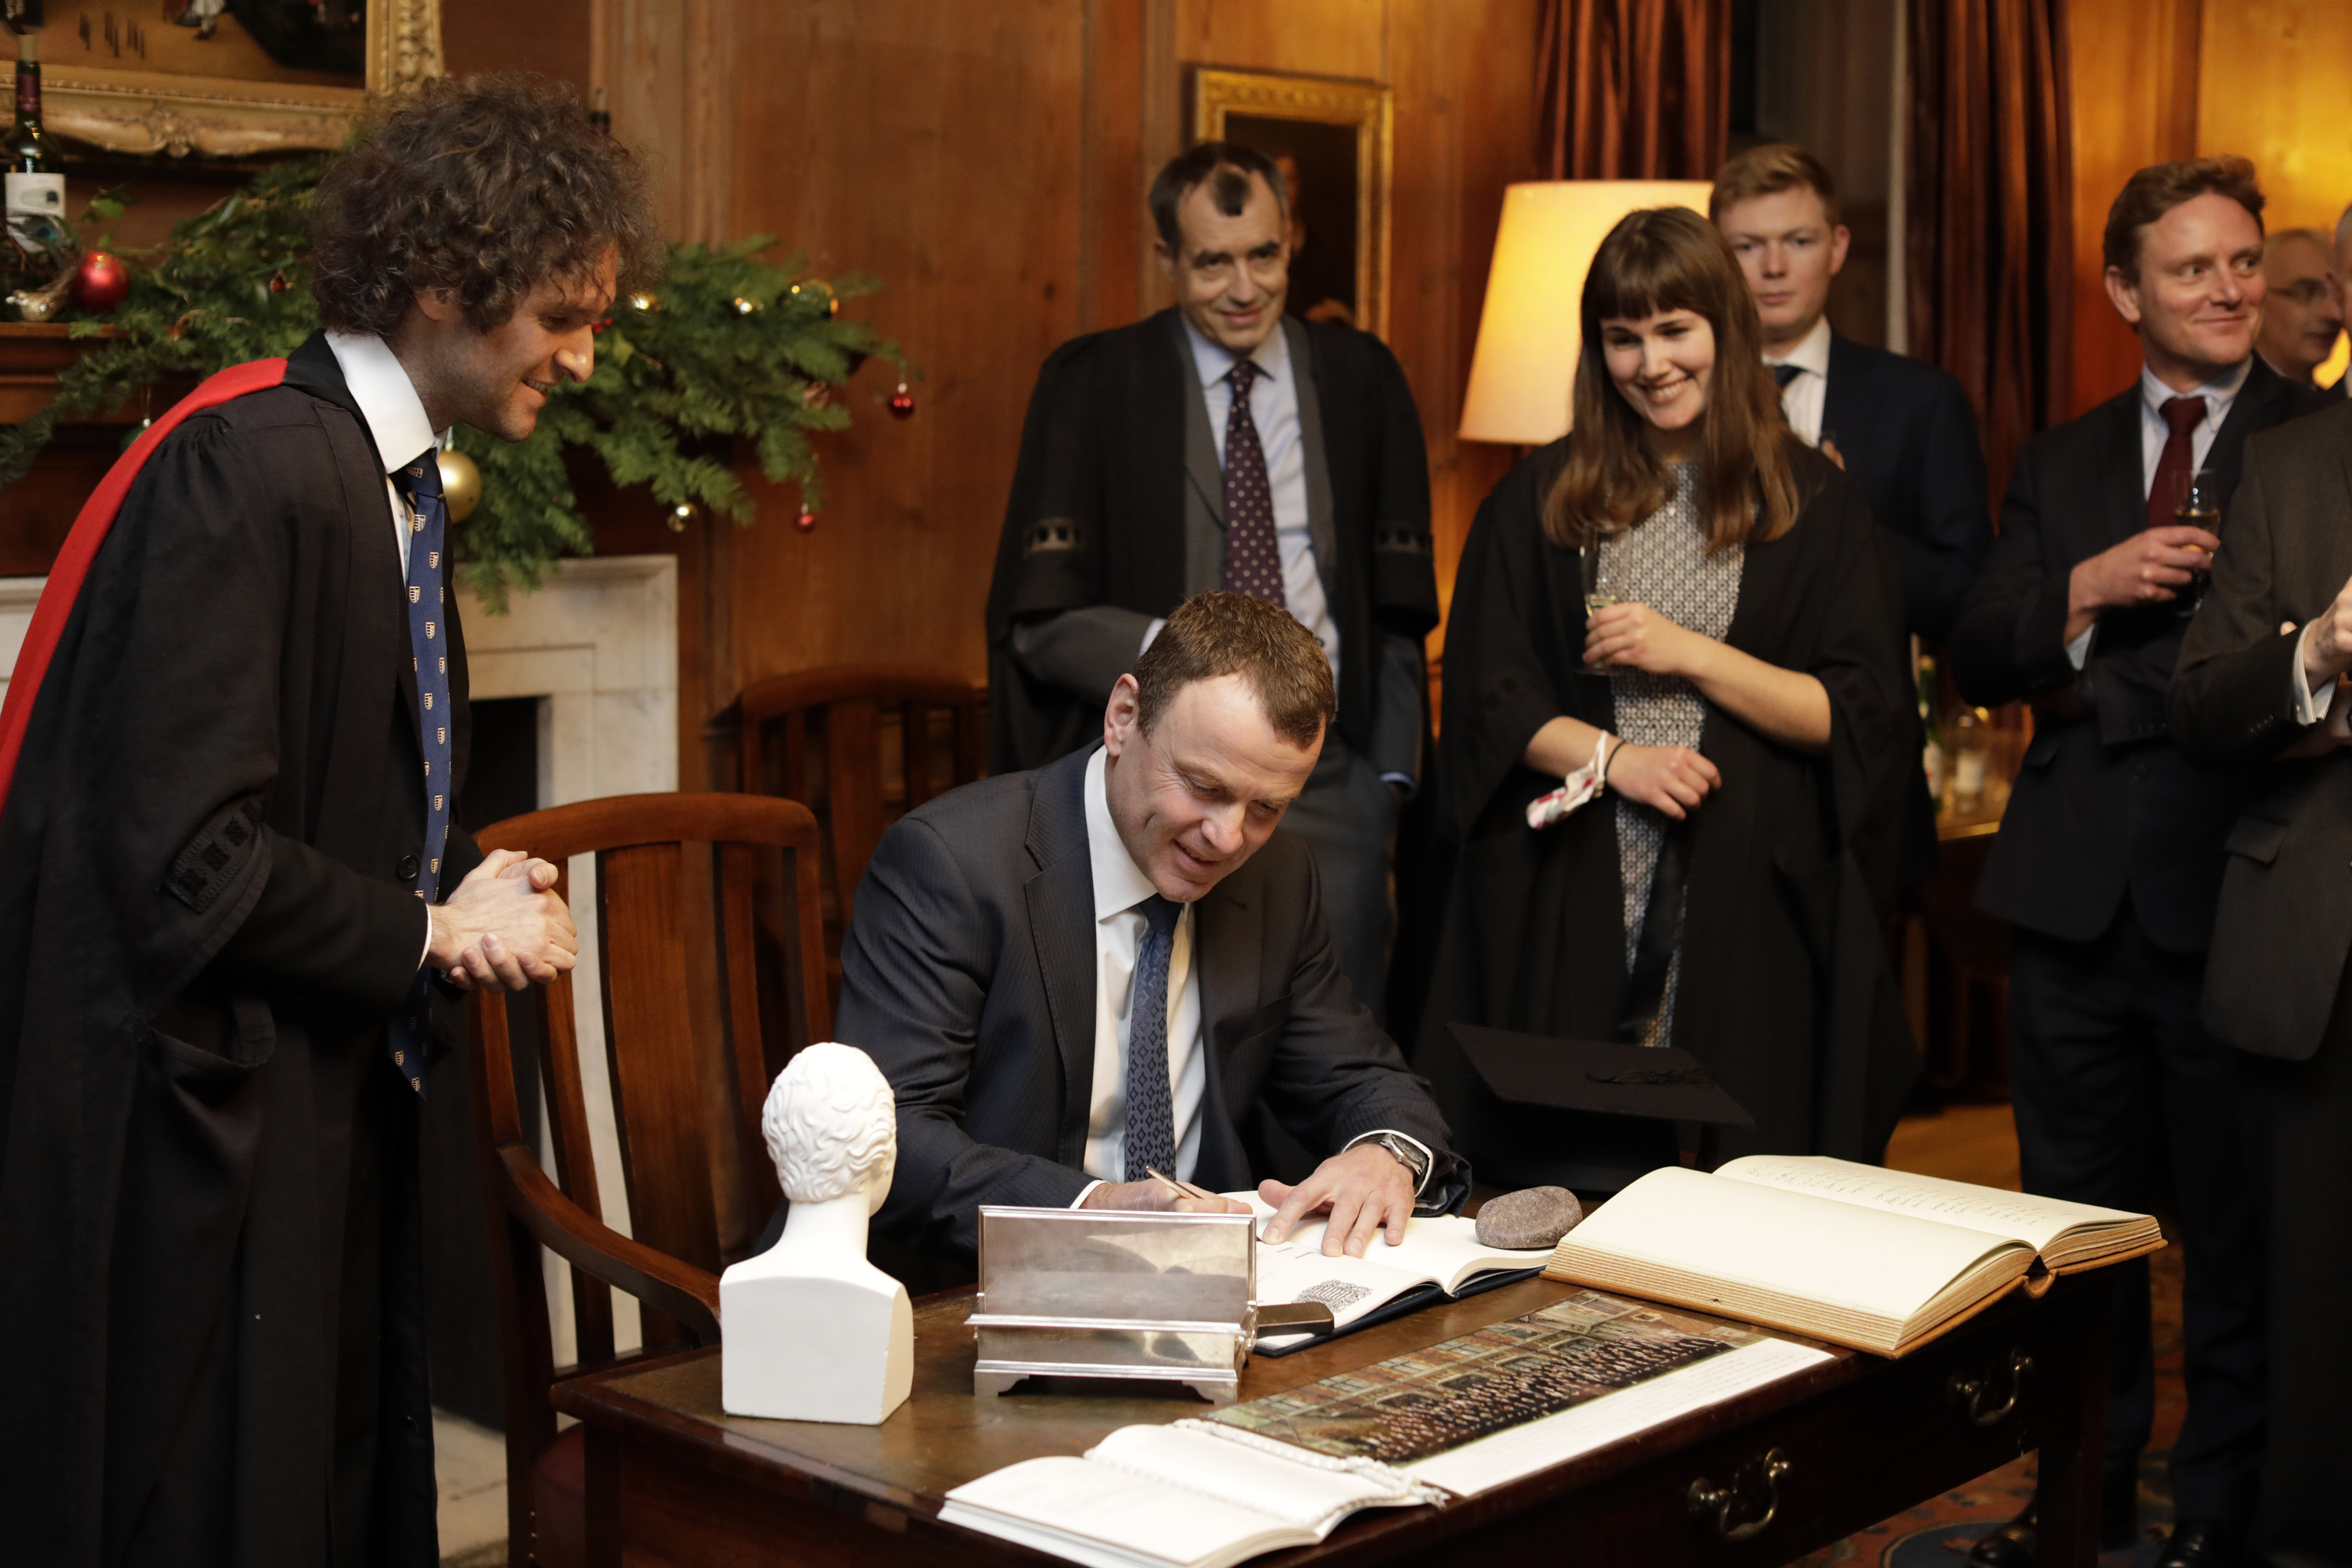 David Bateman signs the Matriculation Book, watched by the Praelector and other onlookers